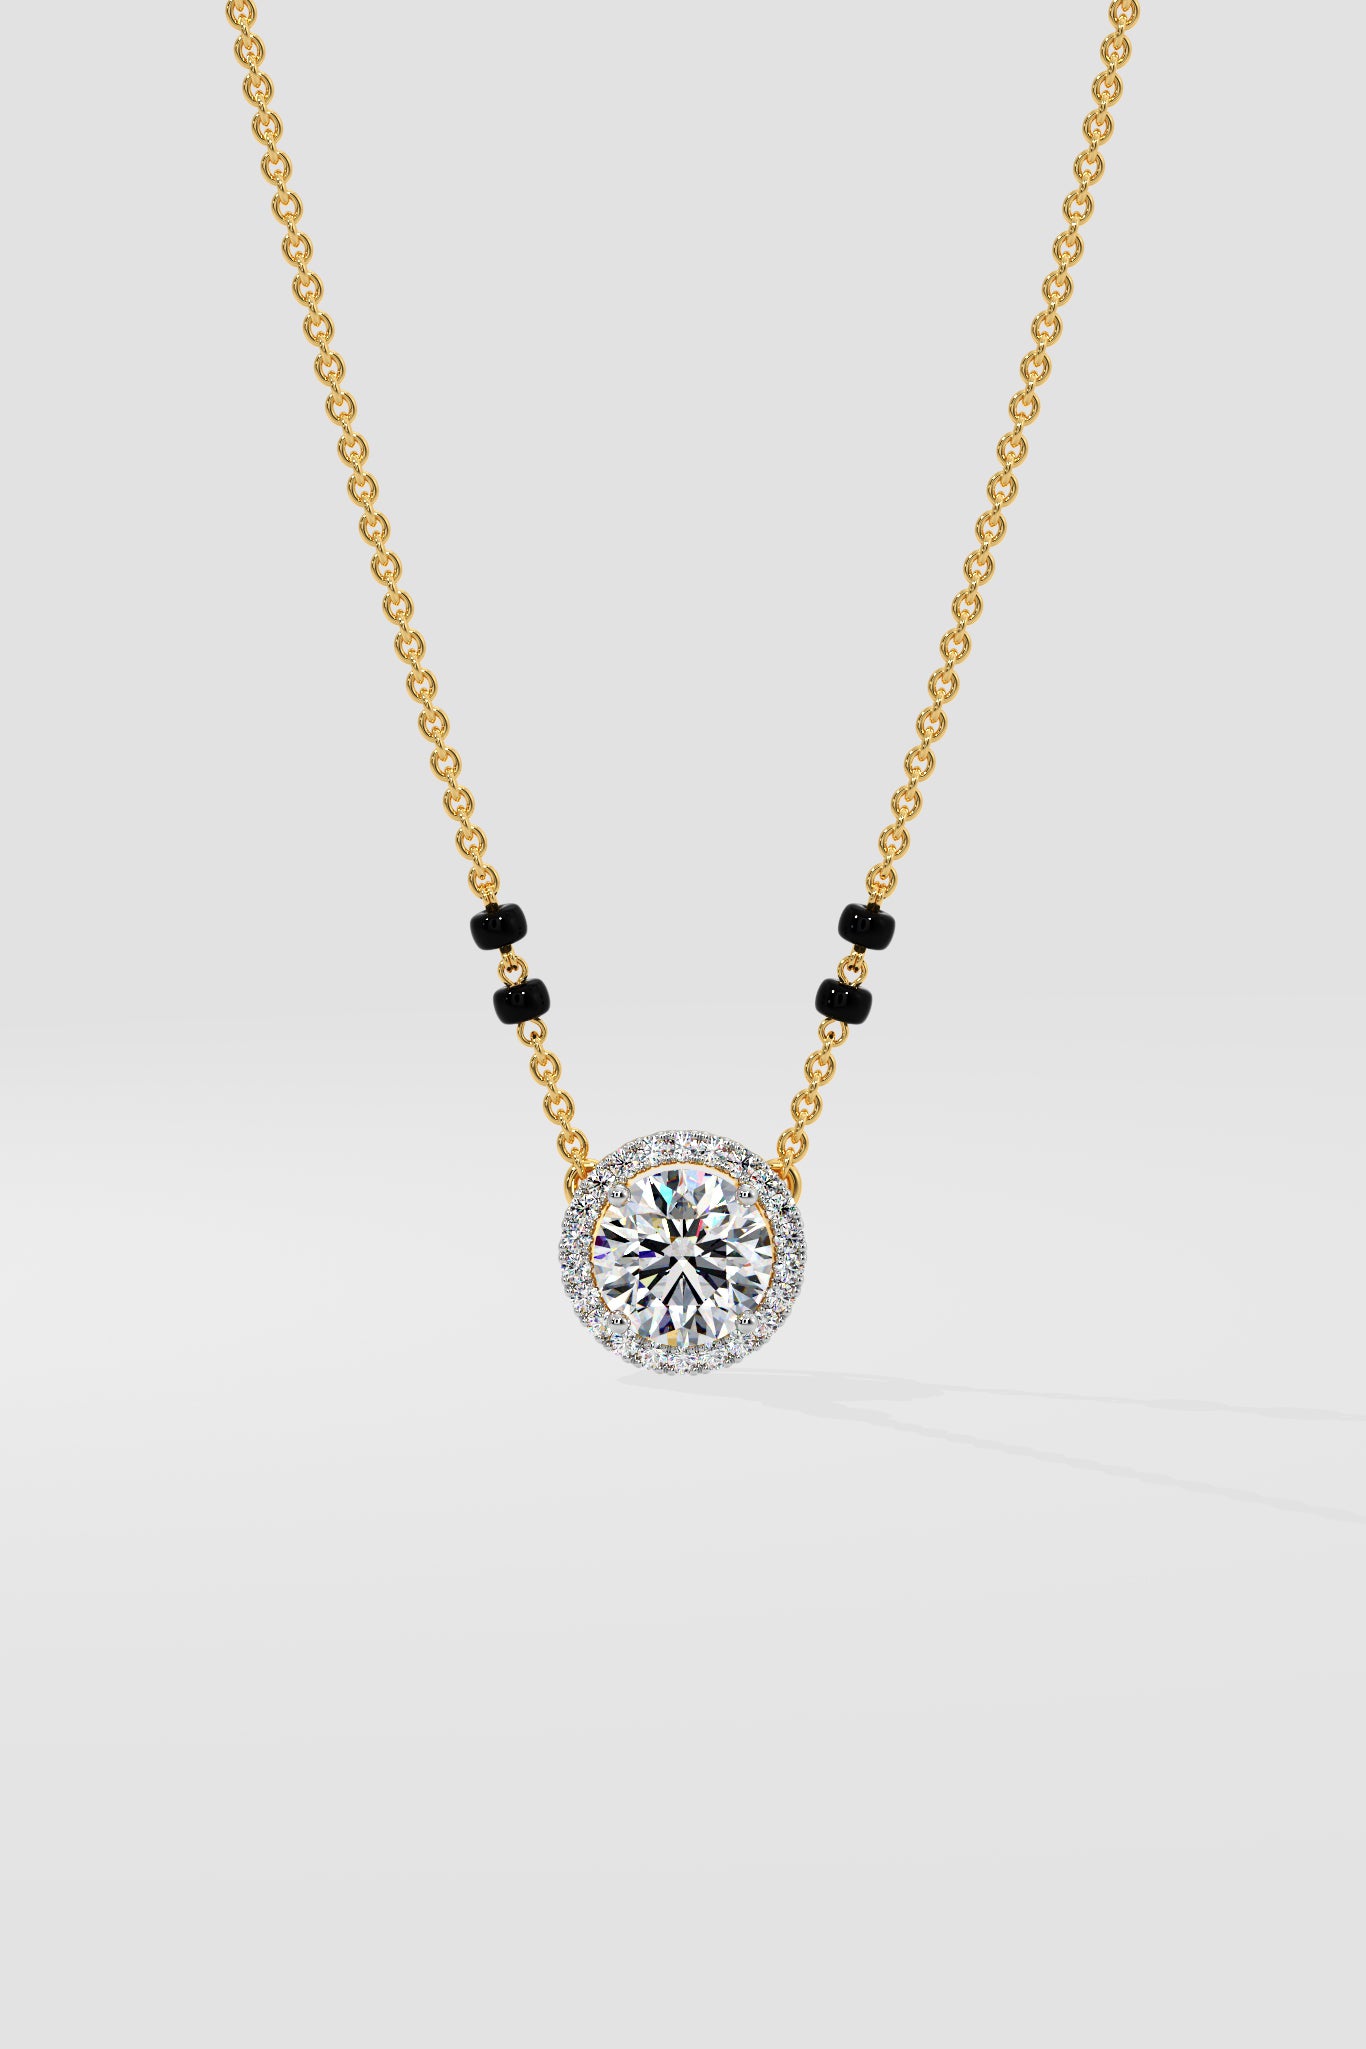 1 ct Solitaire Halo Mangalsutra